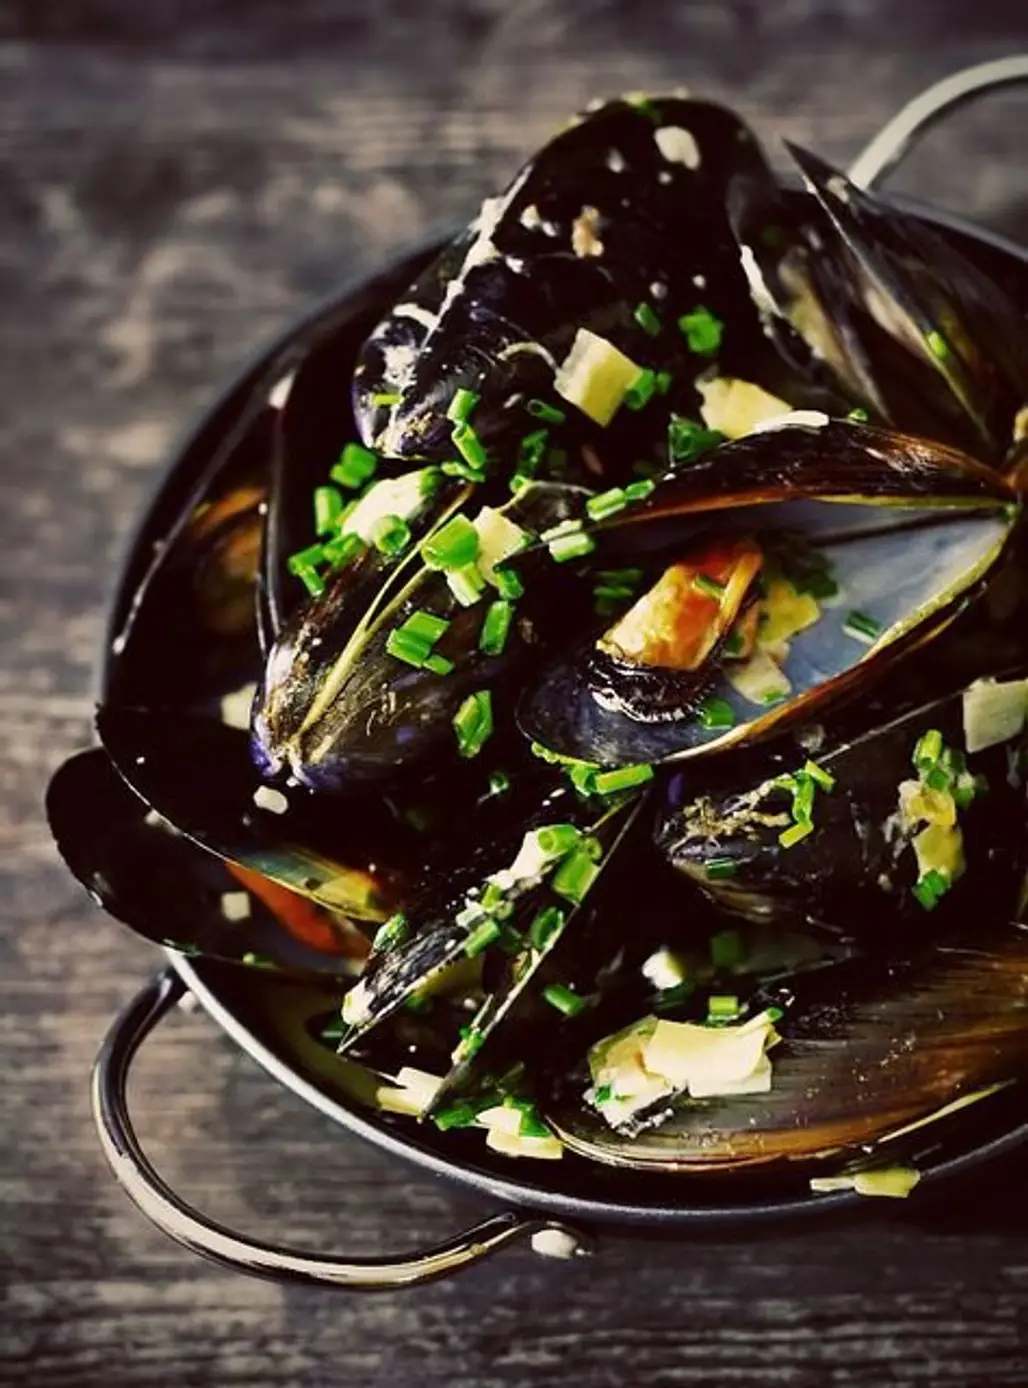 Mussels with Leek, Garlic and Sherry Cream